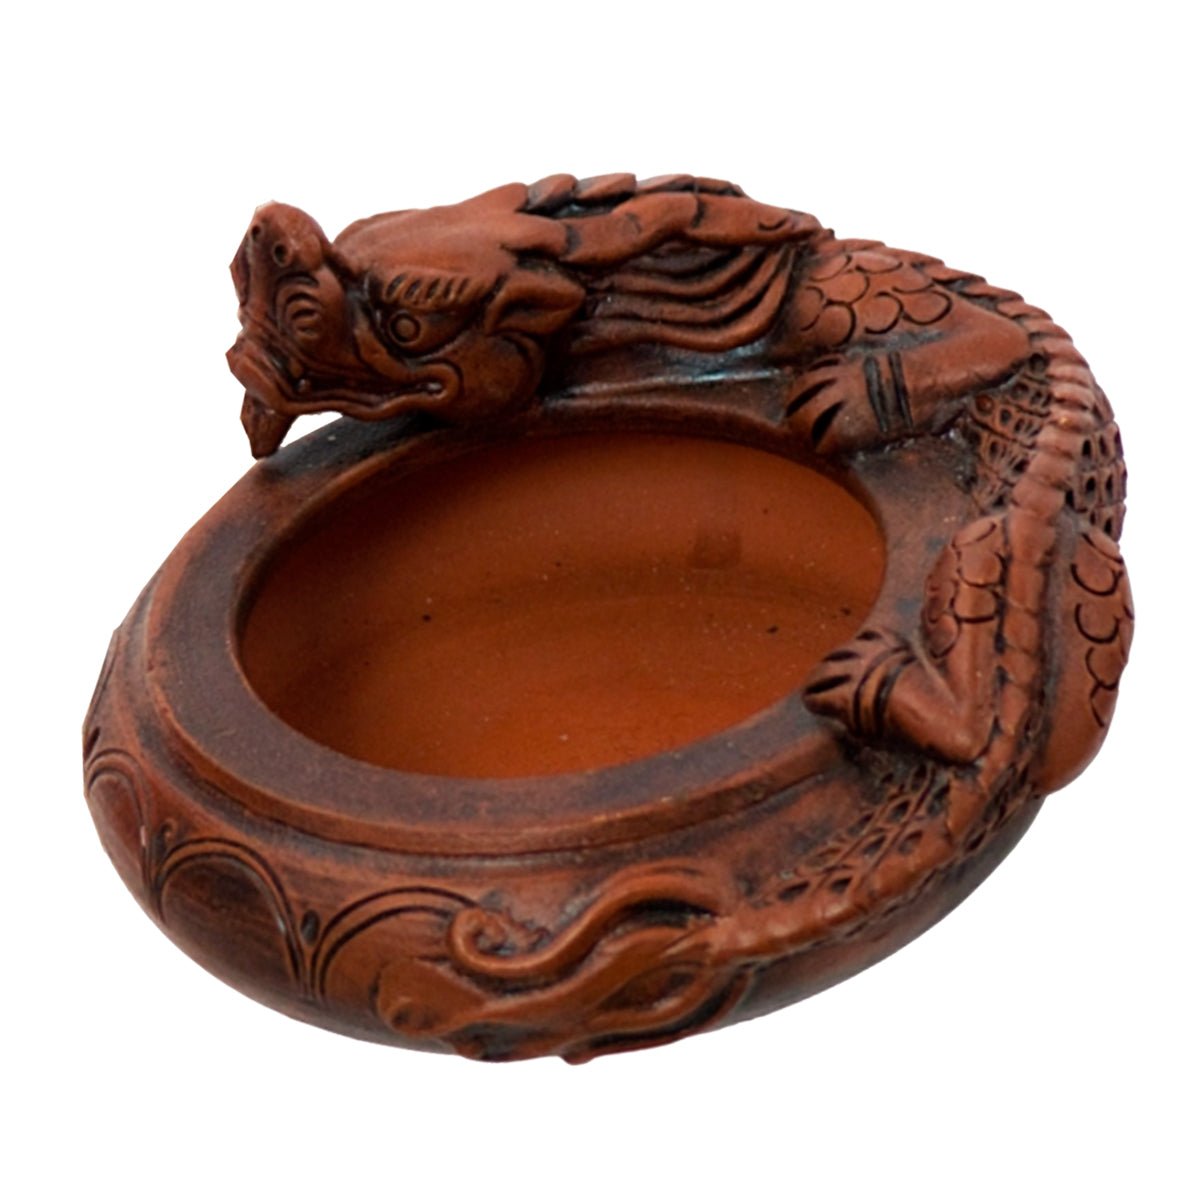 Dragon Terra Cotta Bowl with Sand - 13 Moons